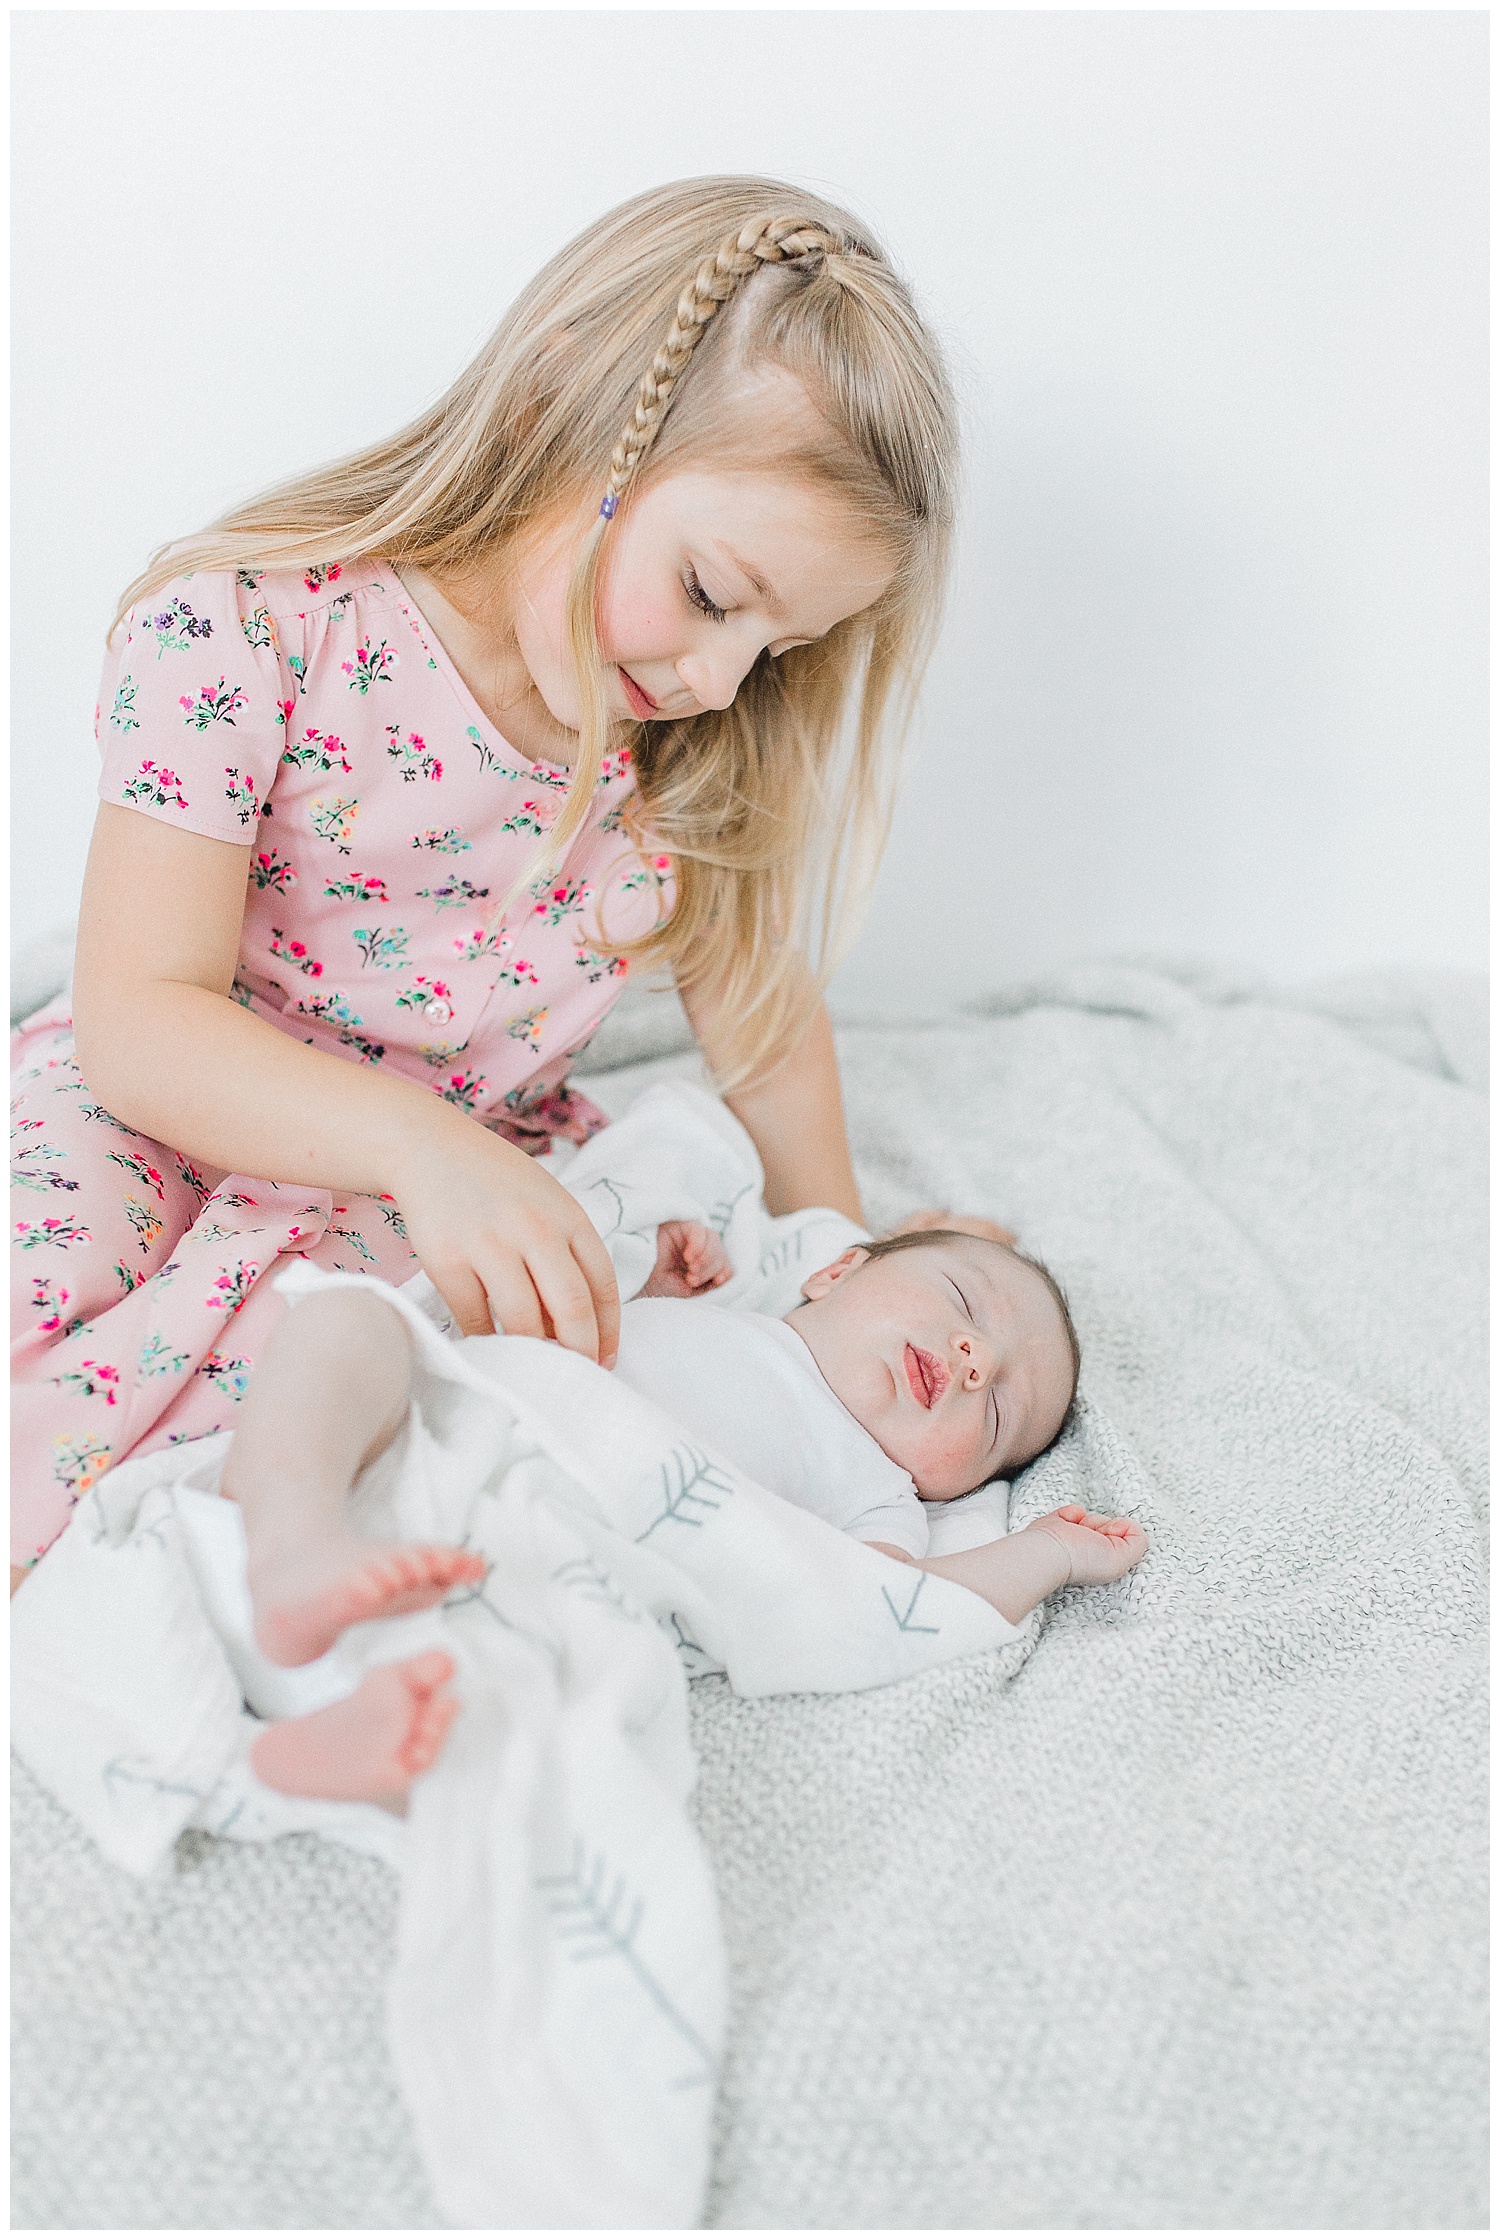 Newborn Lifestyle In-Studio Photo Session Light and Airy Kindred Presets Emma Rose Company Seattle Portland Wedding and Portrait Photographer17.jpg